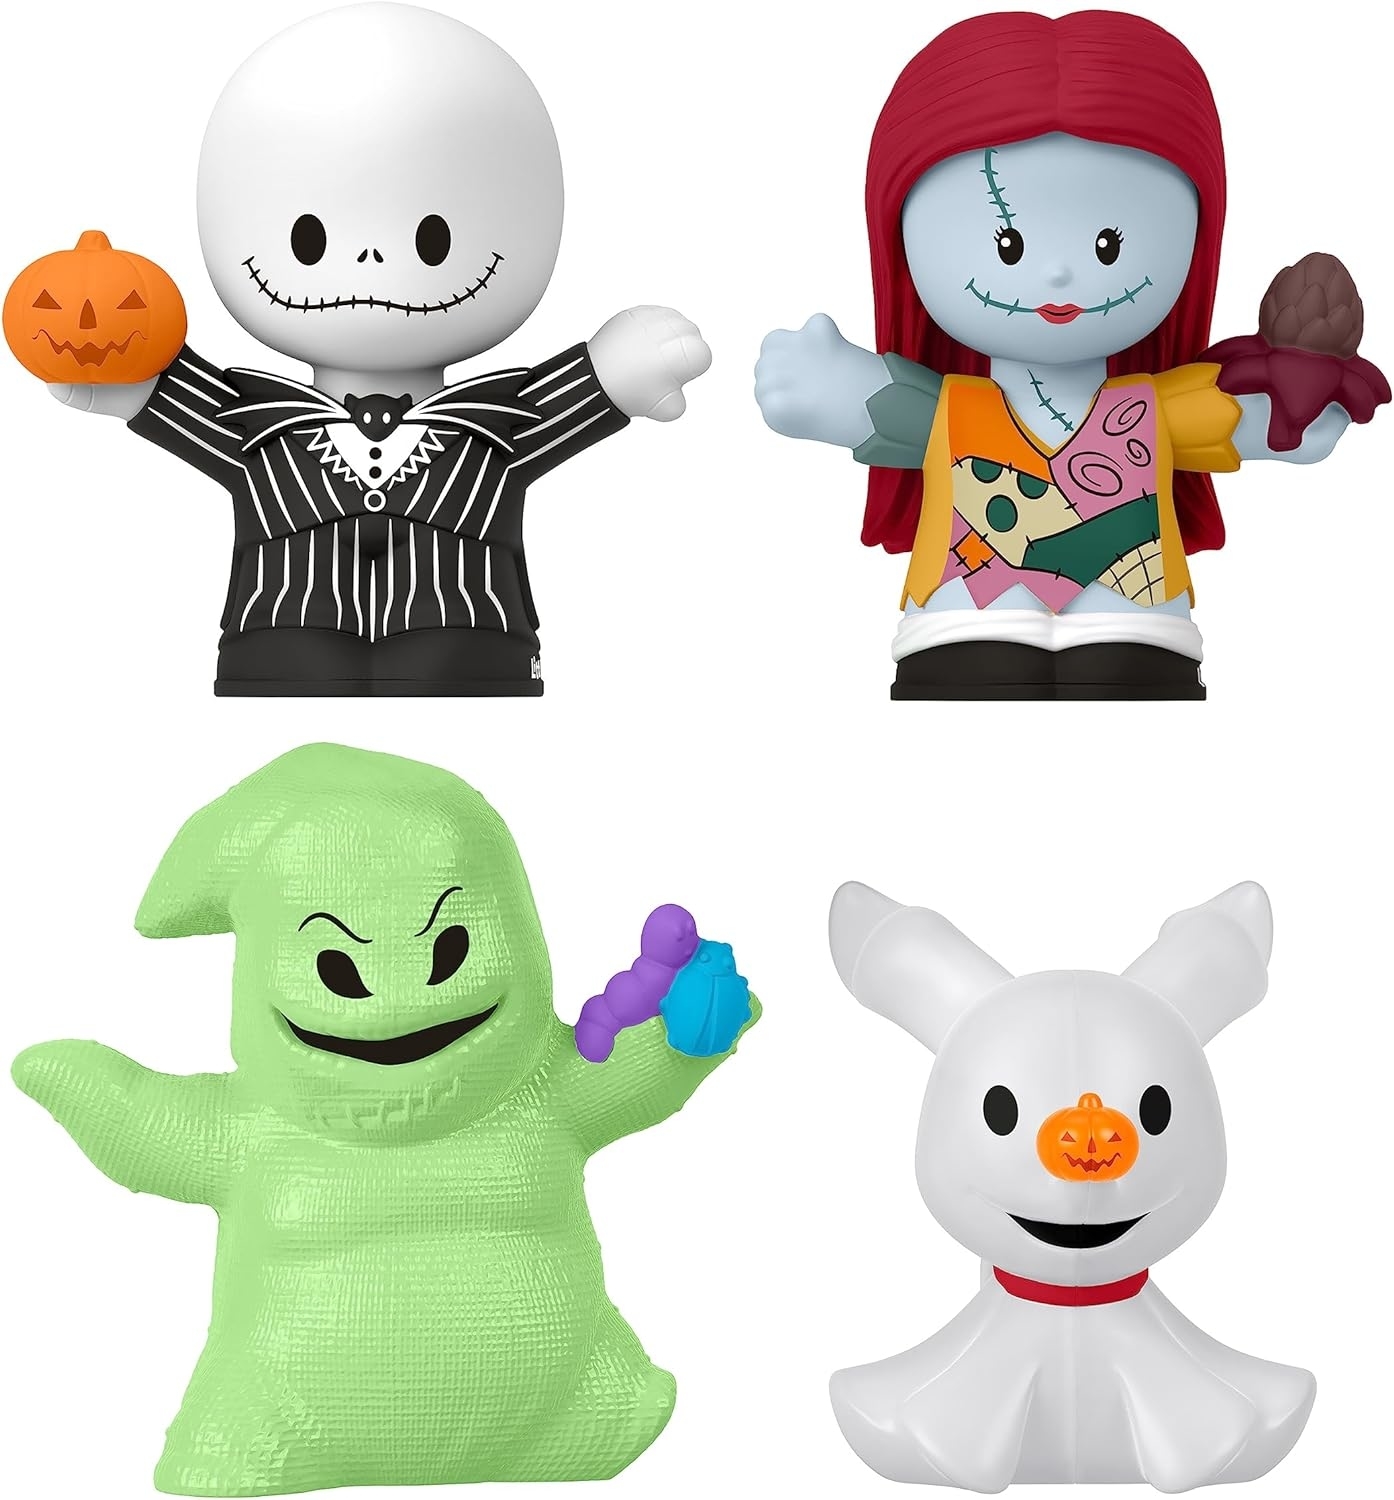 the four piece set of nightmare before christmas figurines